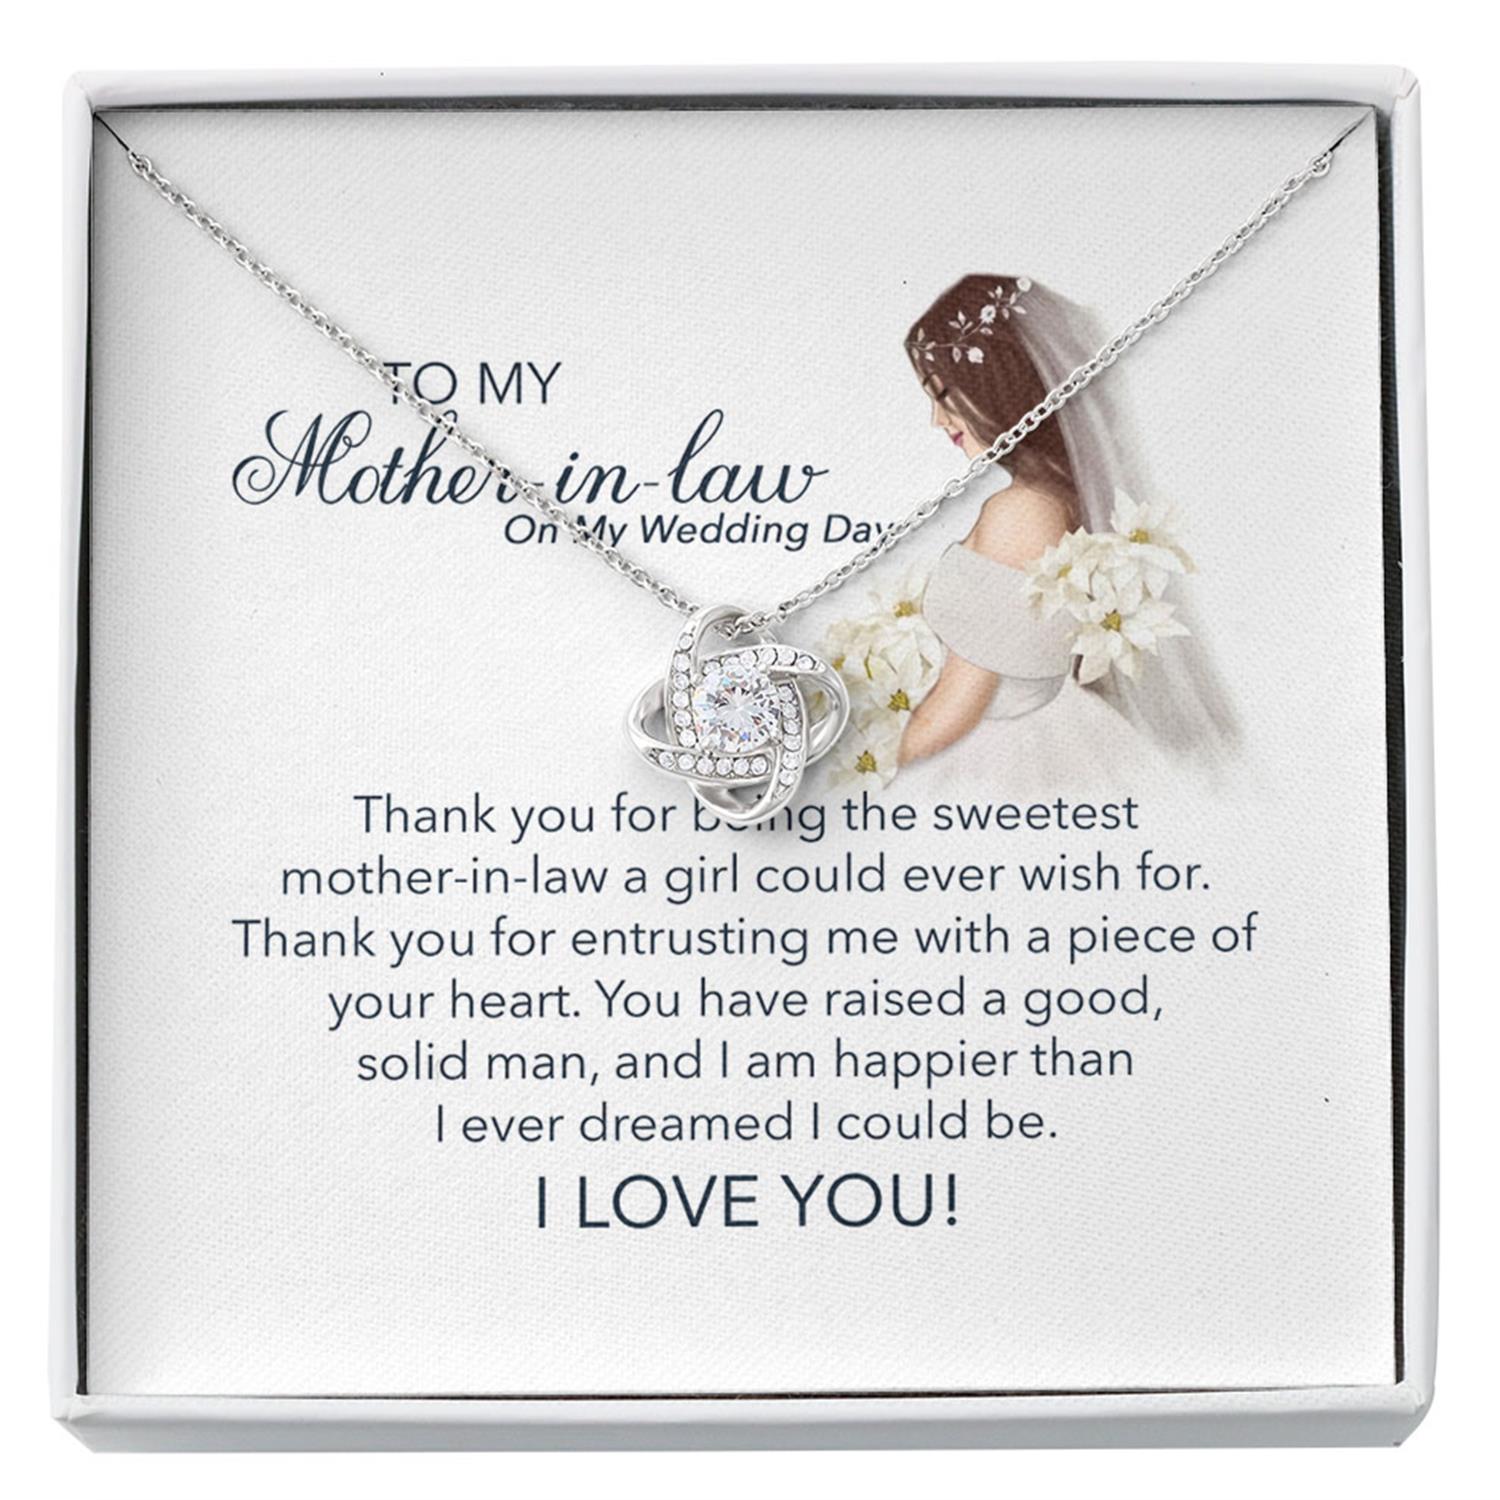 Mother-in-law Necklace, Mother Of Groom Gift From Bride, Mother In Law Wedding Gift, To My Mother In Law On My Wedding Custom Necklace